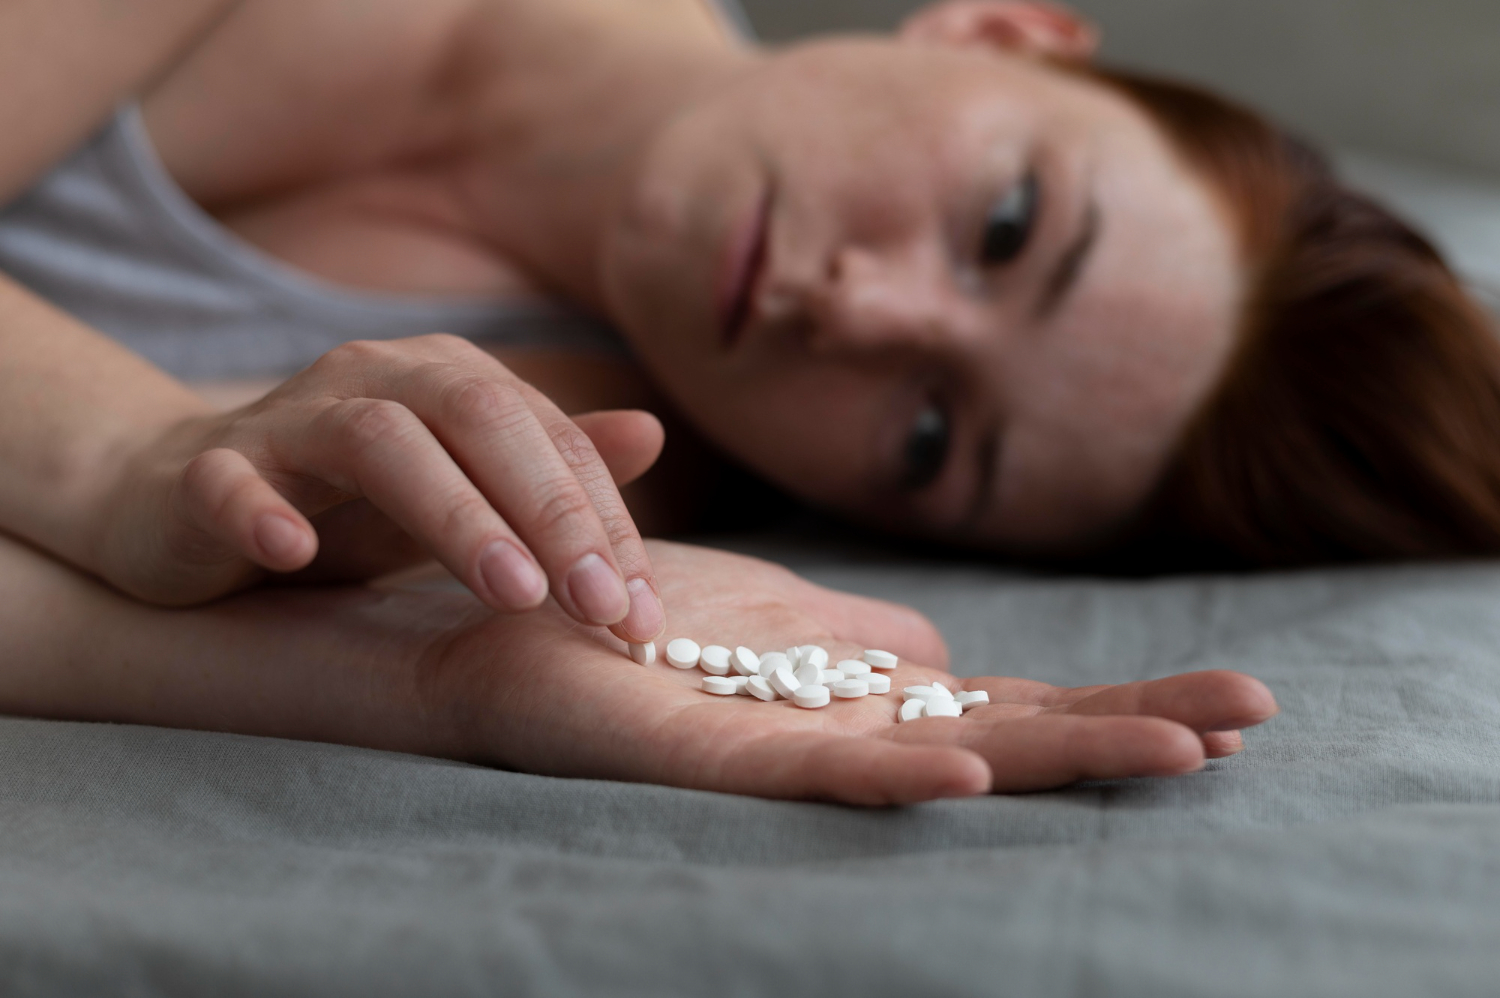 What You Should Know About Opioid Dependence and How to Beat It